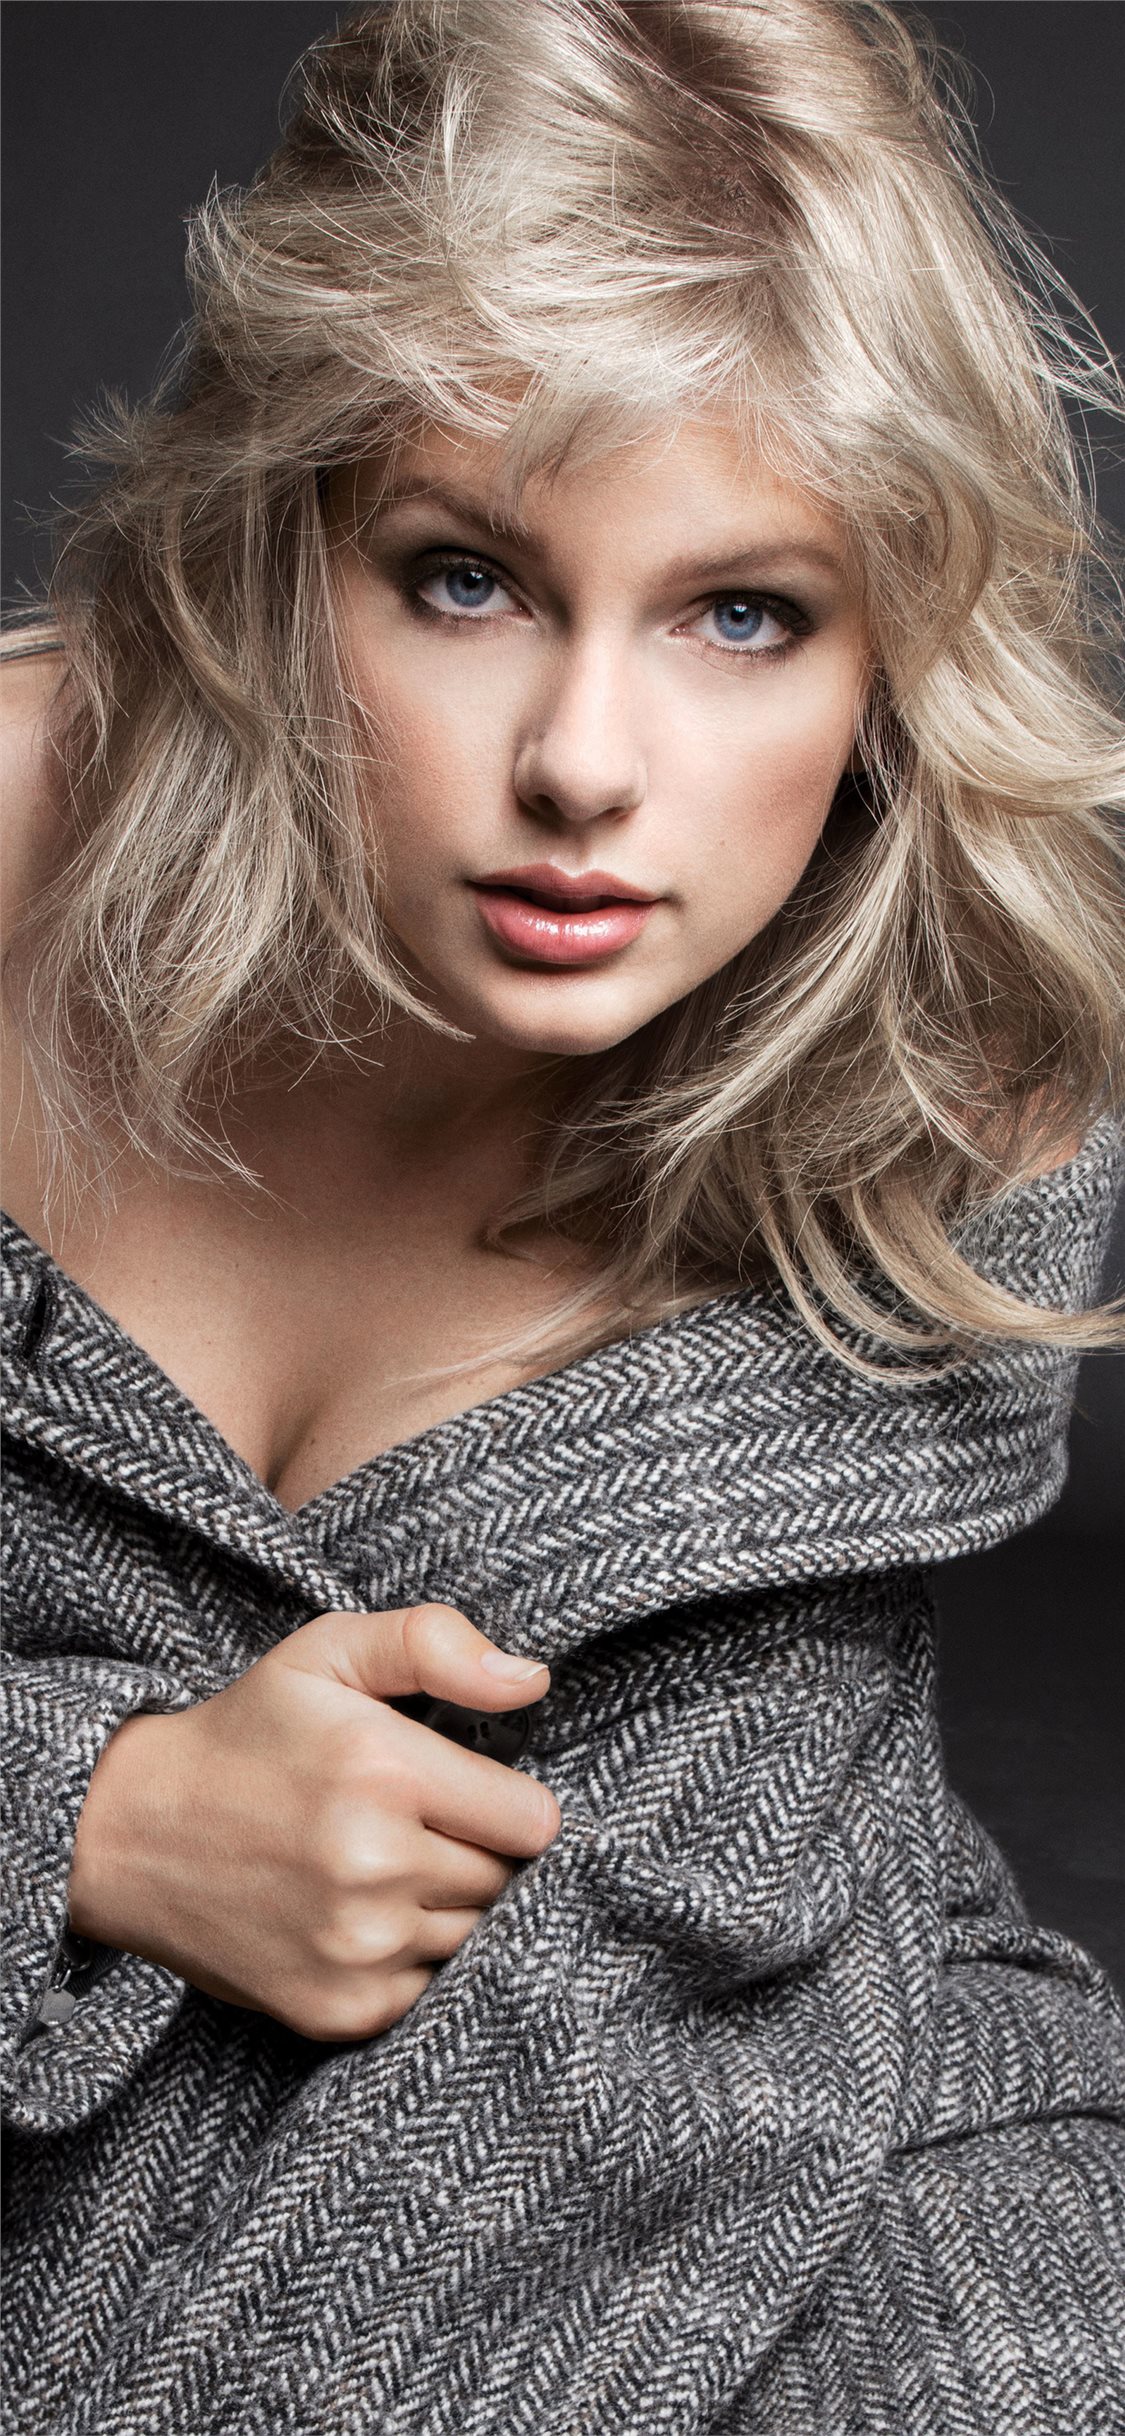 Taylor Swift Iphone Wallpapers